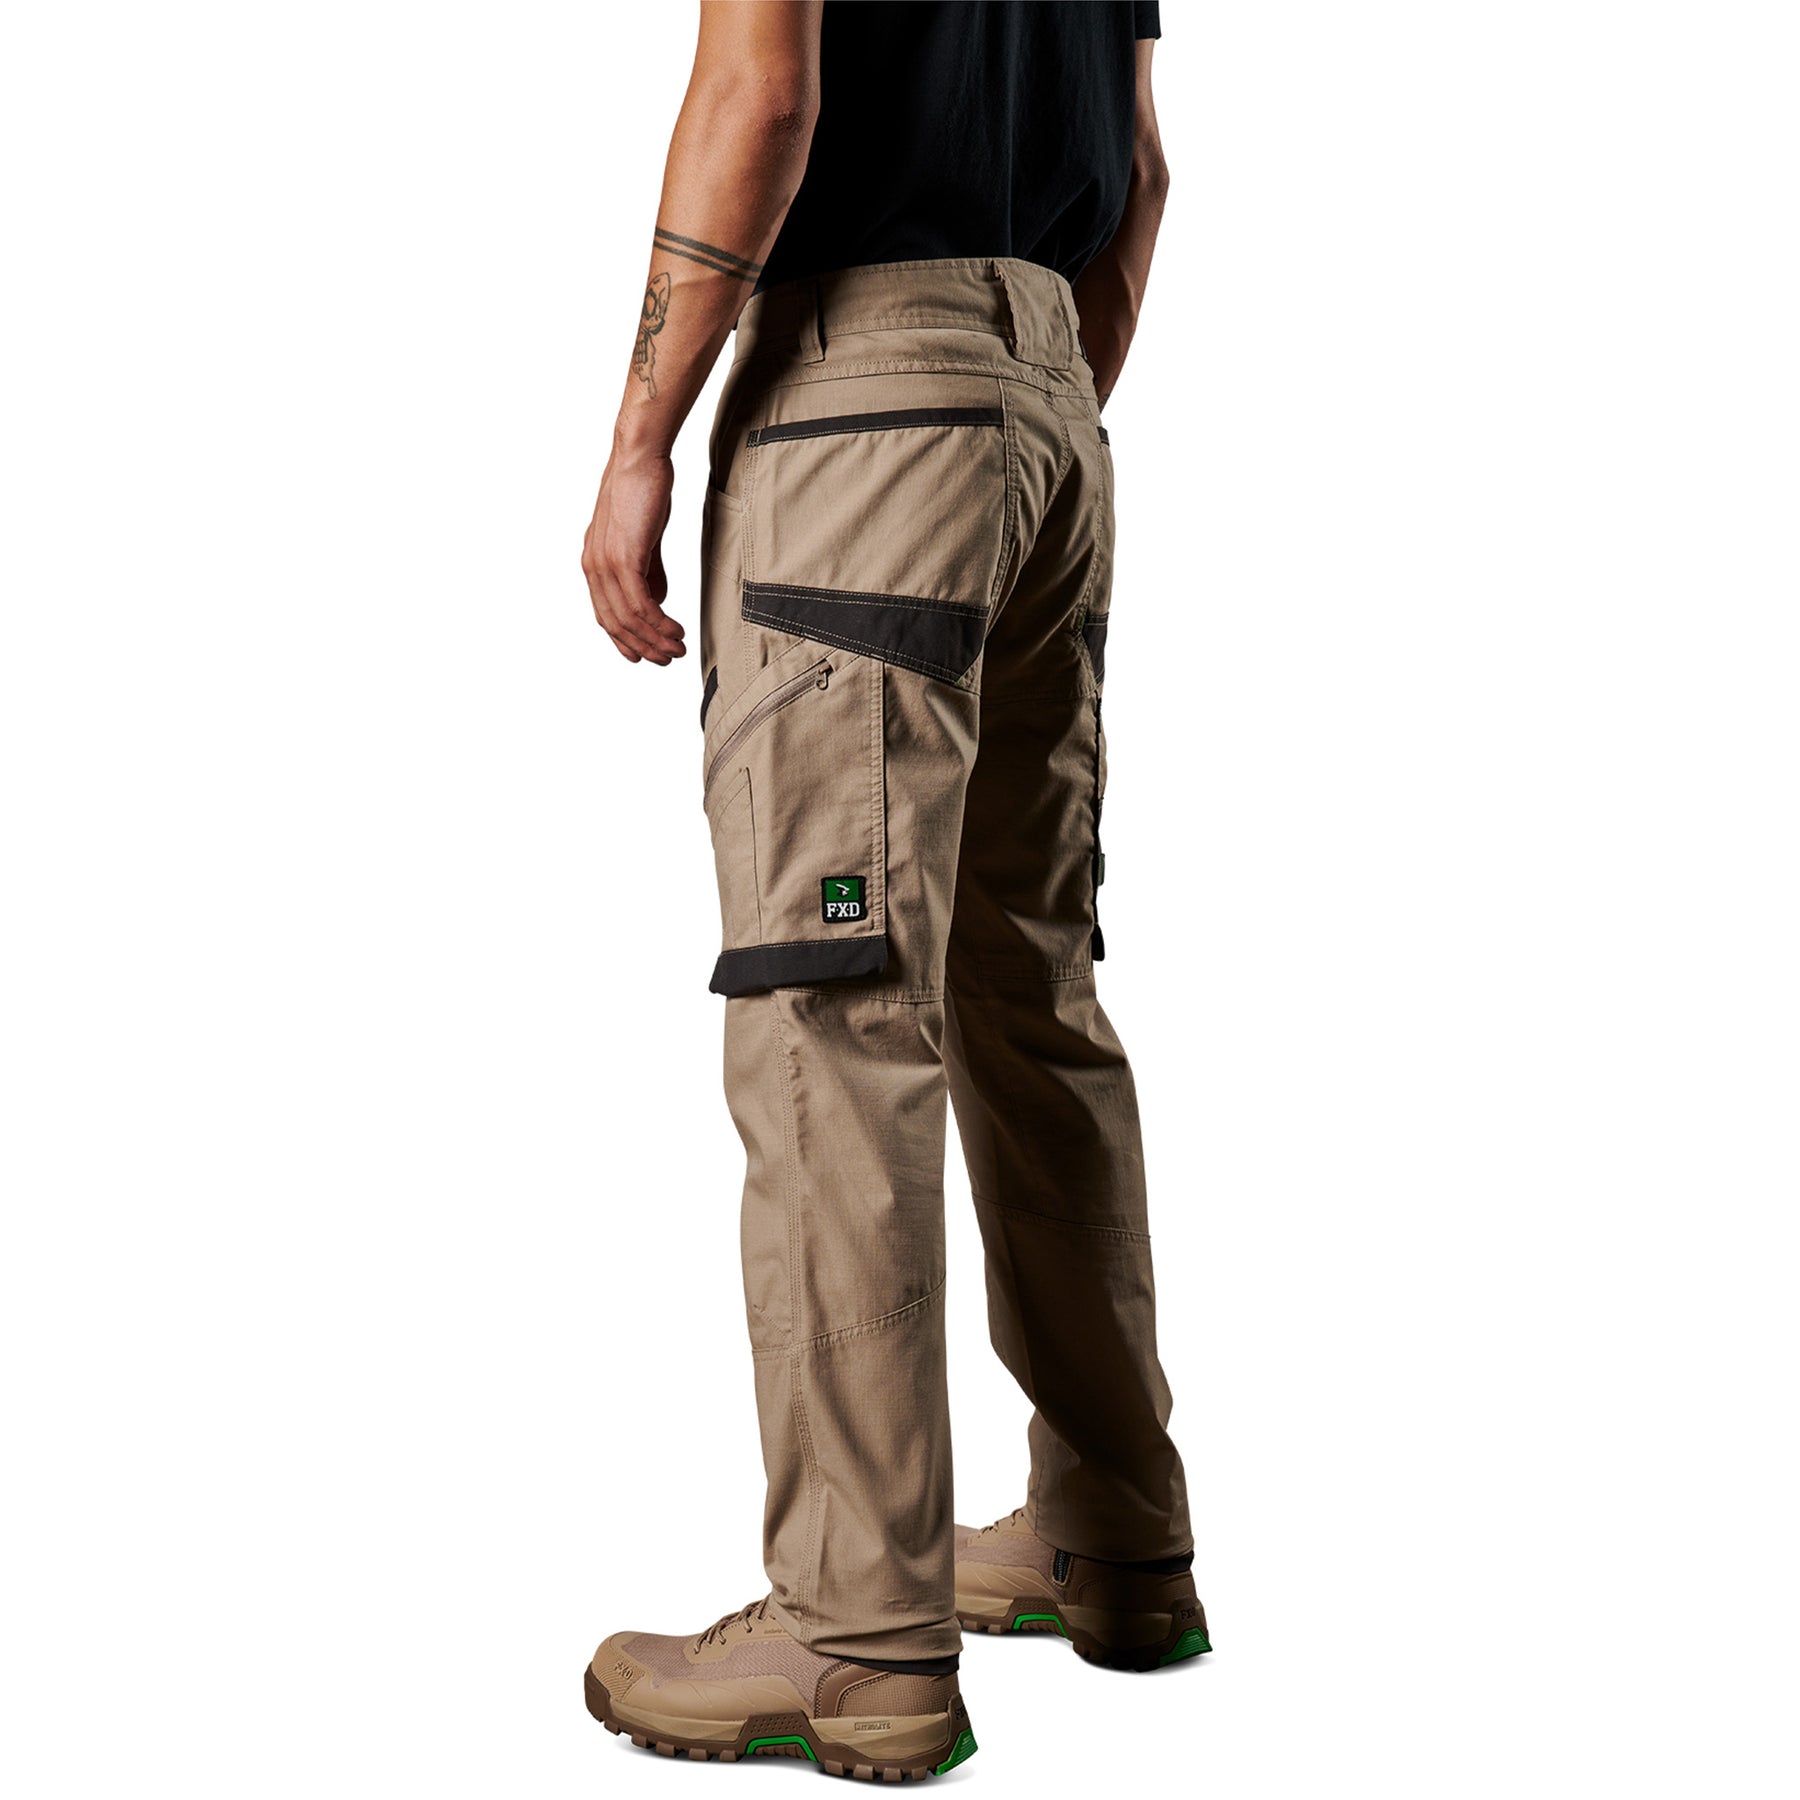 fxd stretch ripstop work pant in khaki